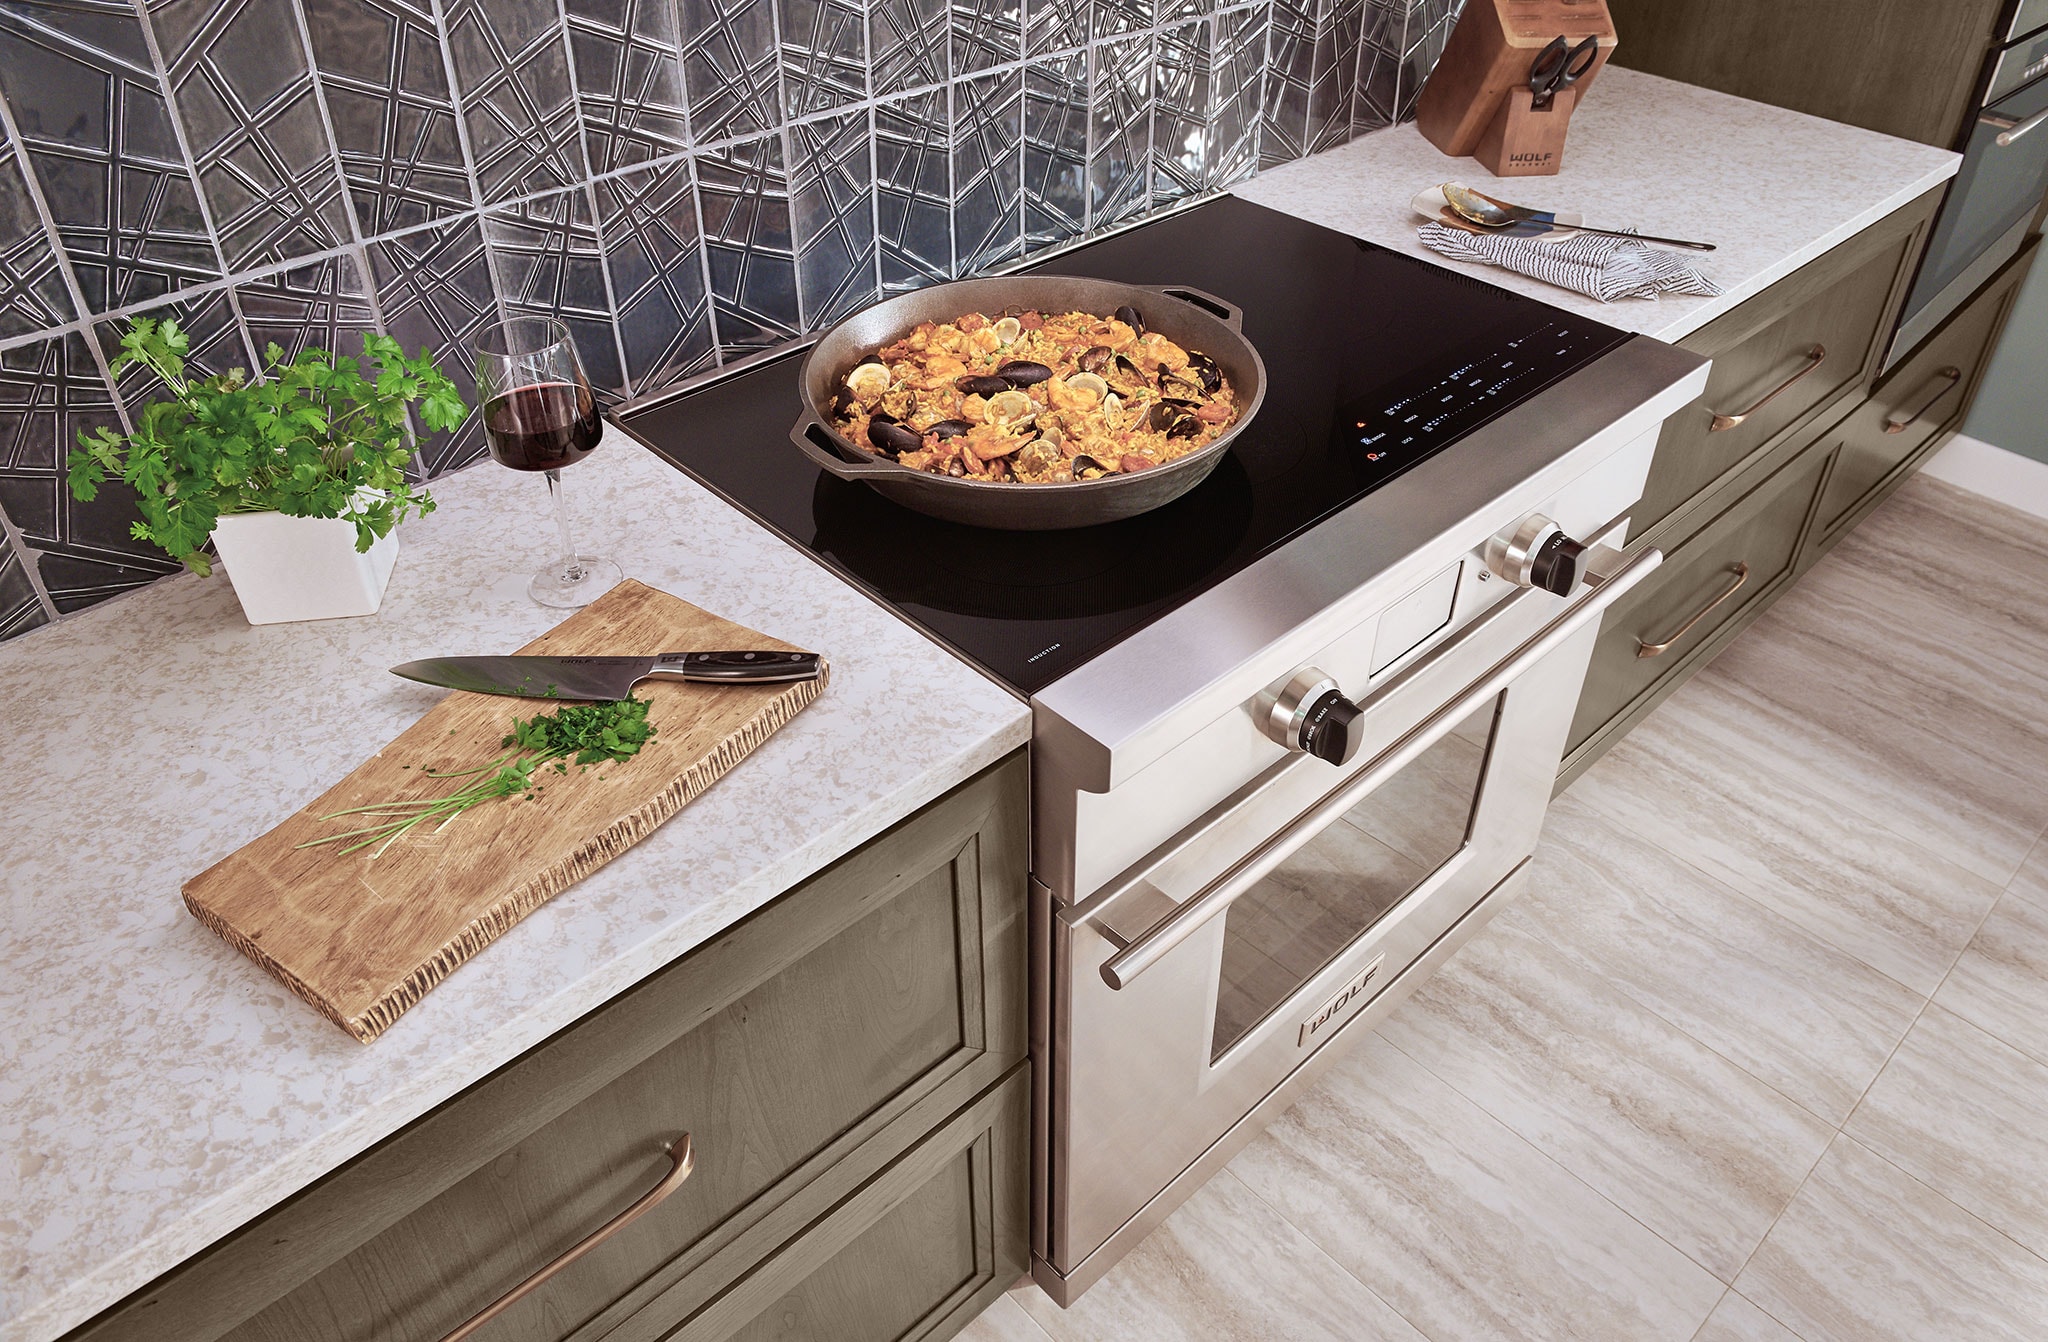 Should You Buy a Wolf Induction Range?